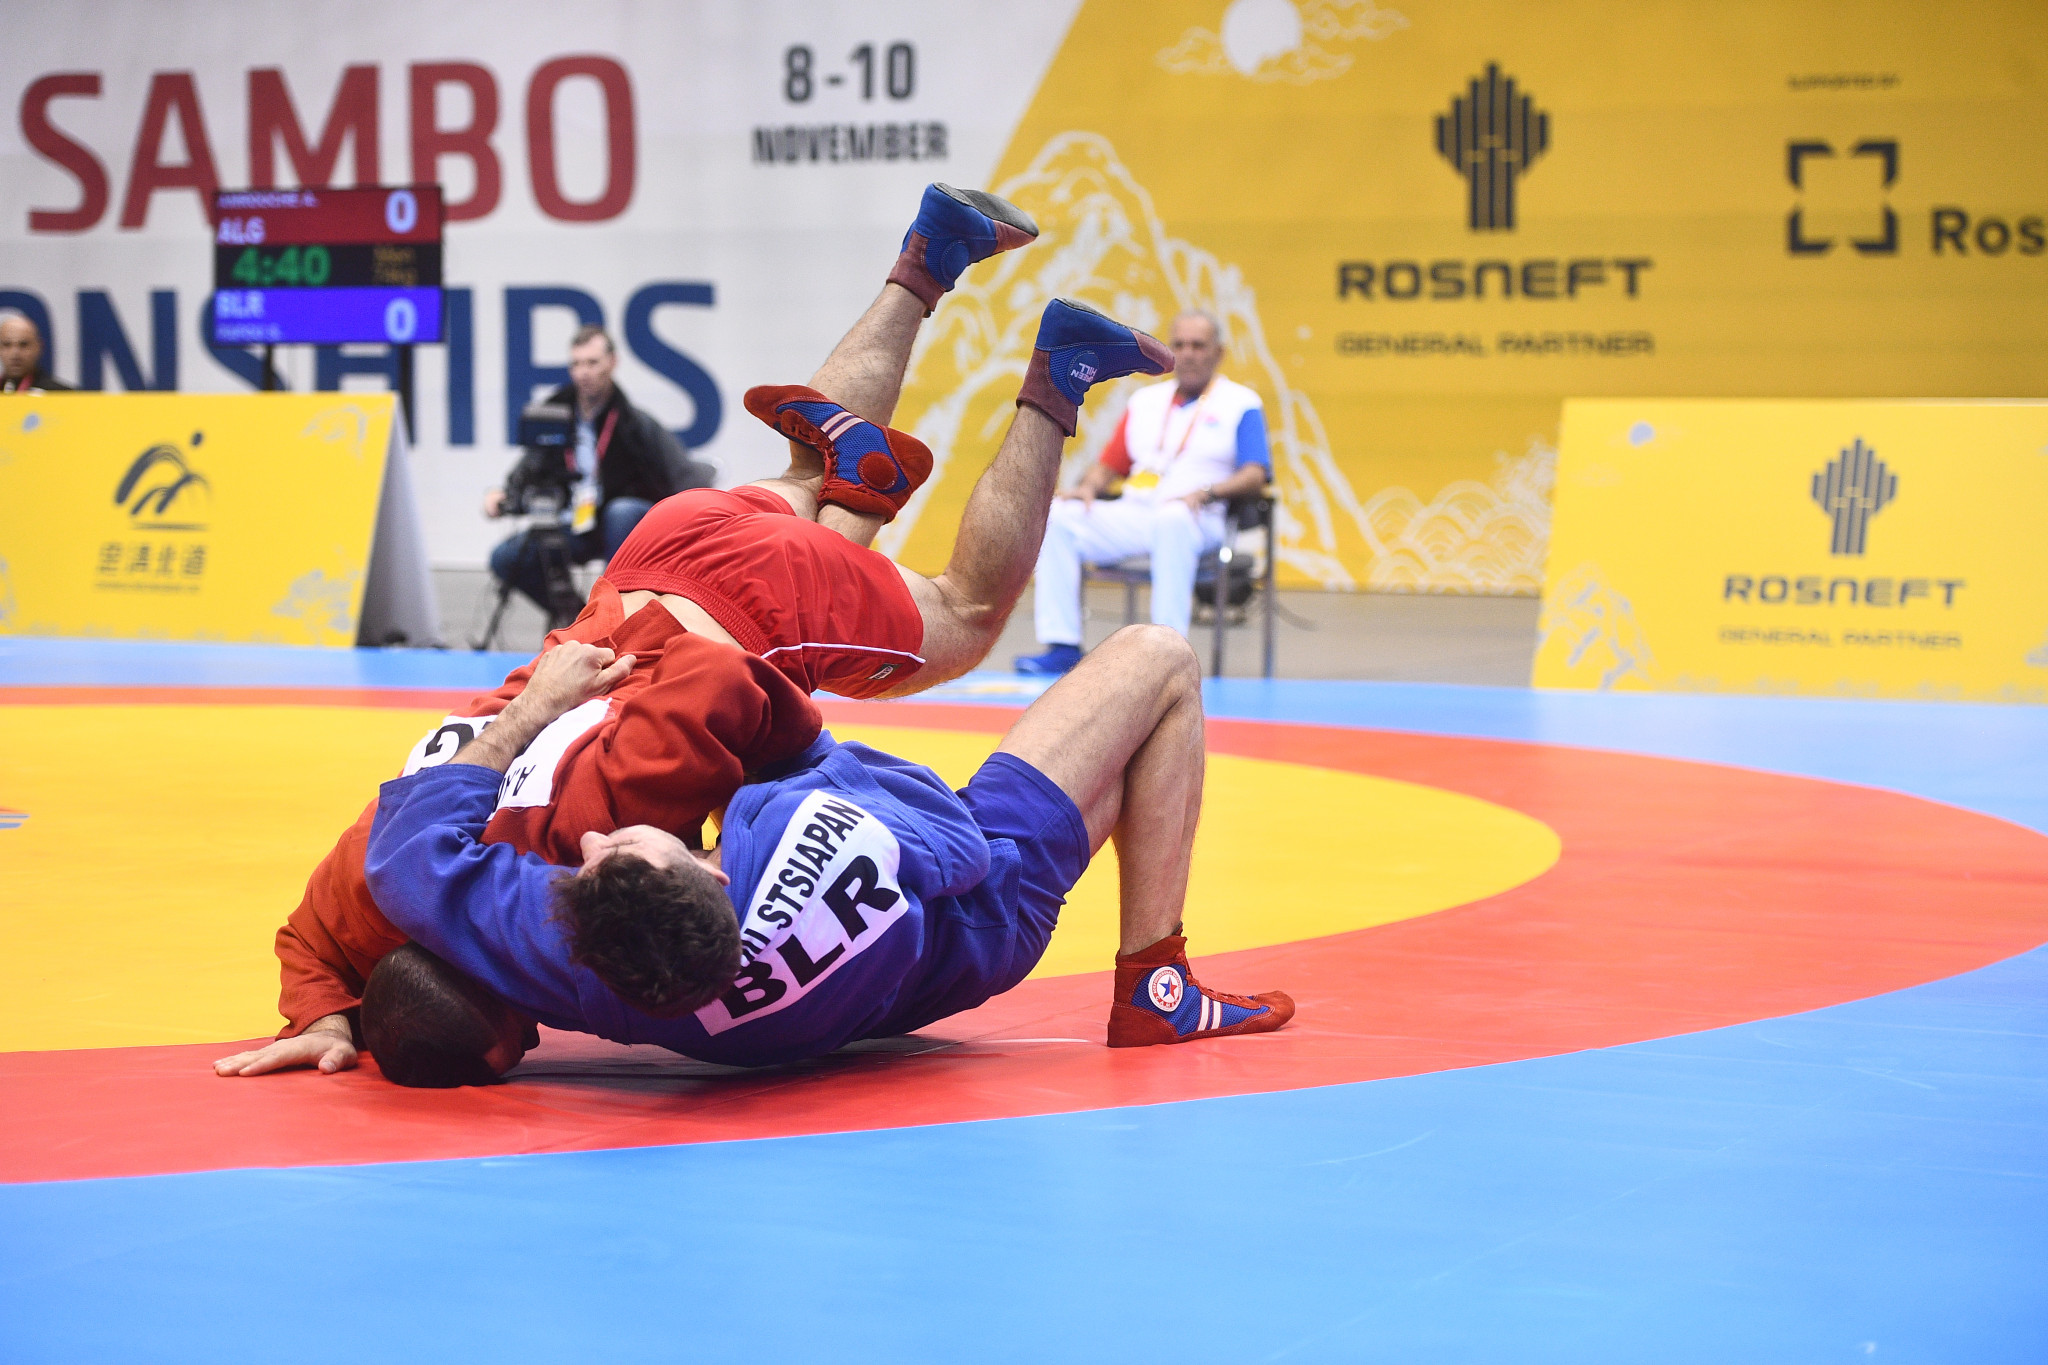 The men's sambo events have brought fierce competition on the sambo mats ©FIAS 